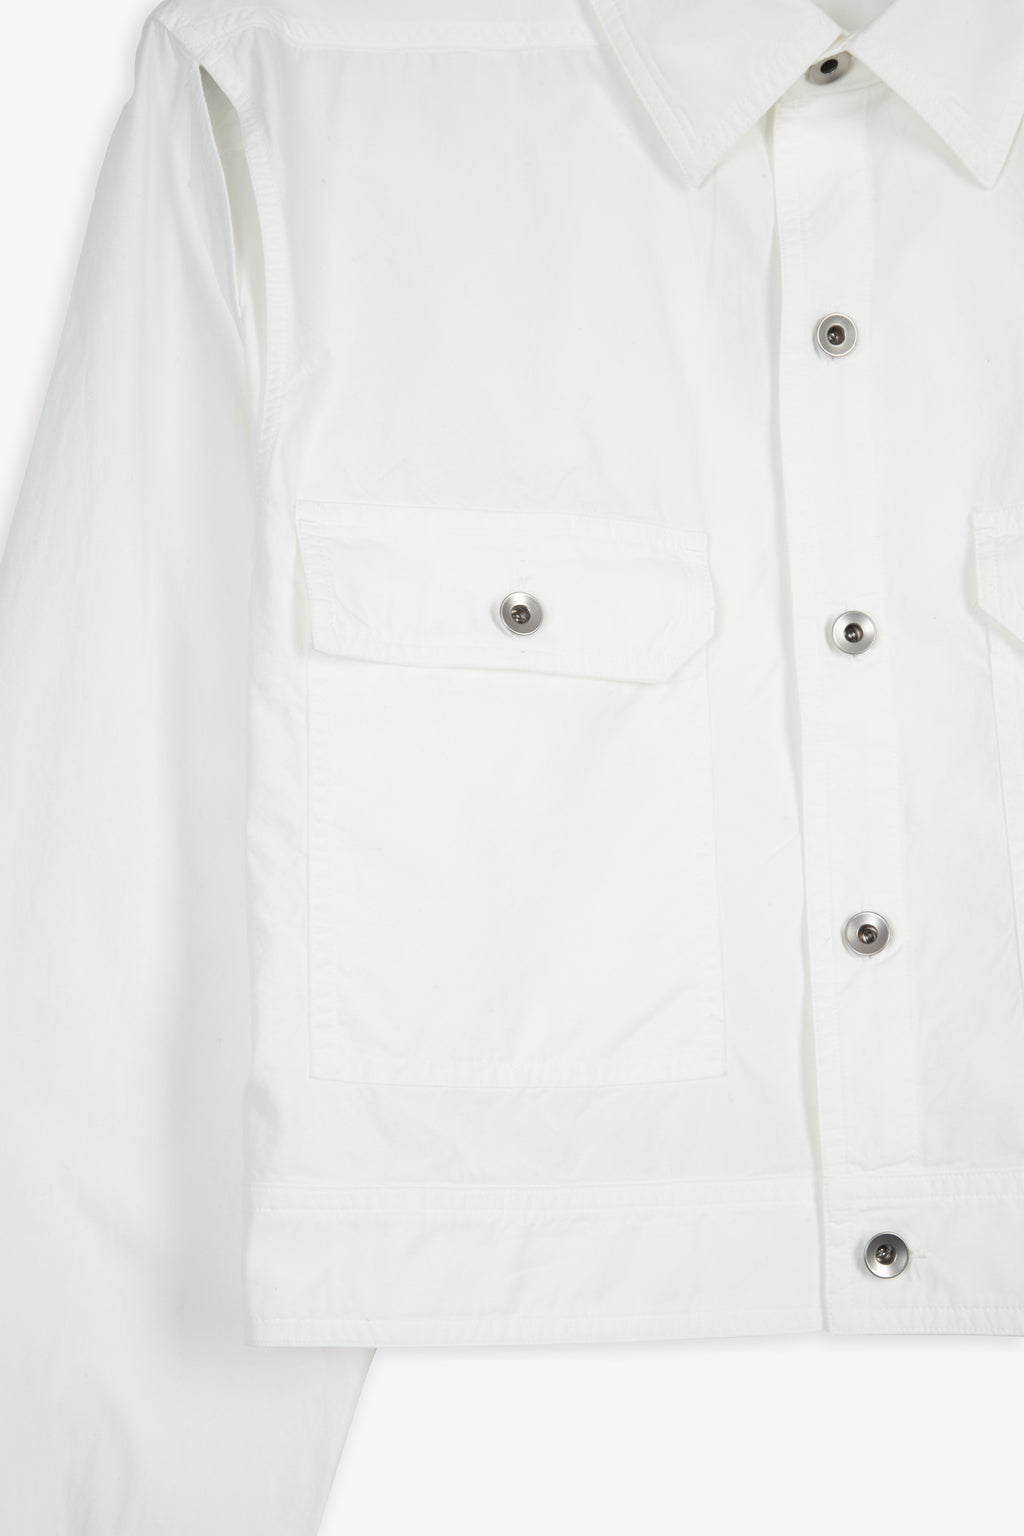 alt-image__White-poplin-cotton-outershirt---Cape-sleeve-cropped-outershirt-